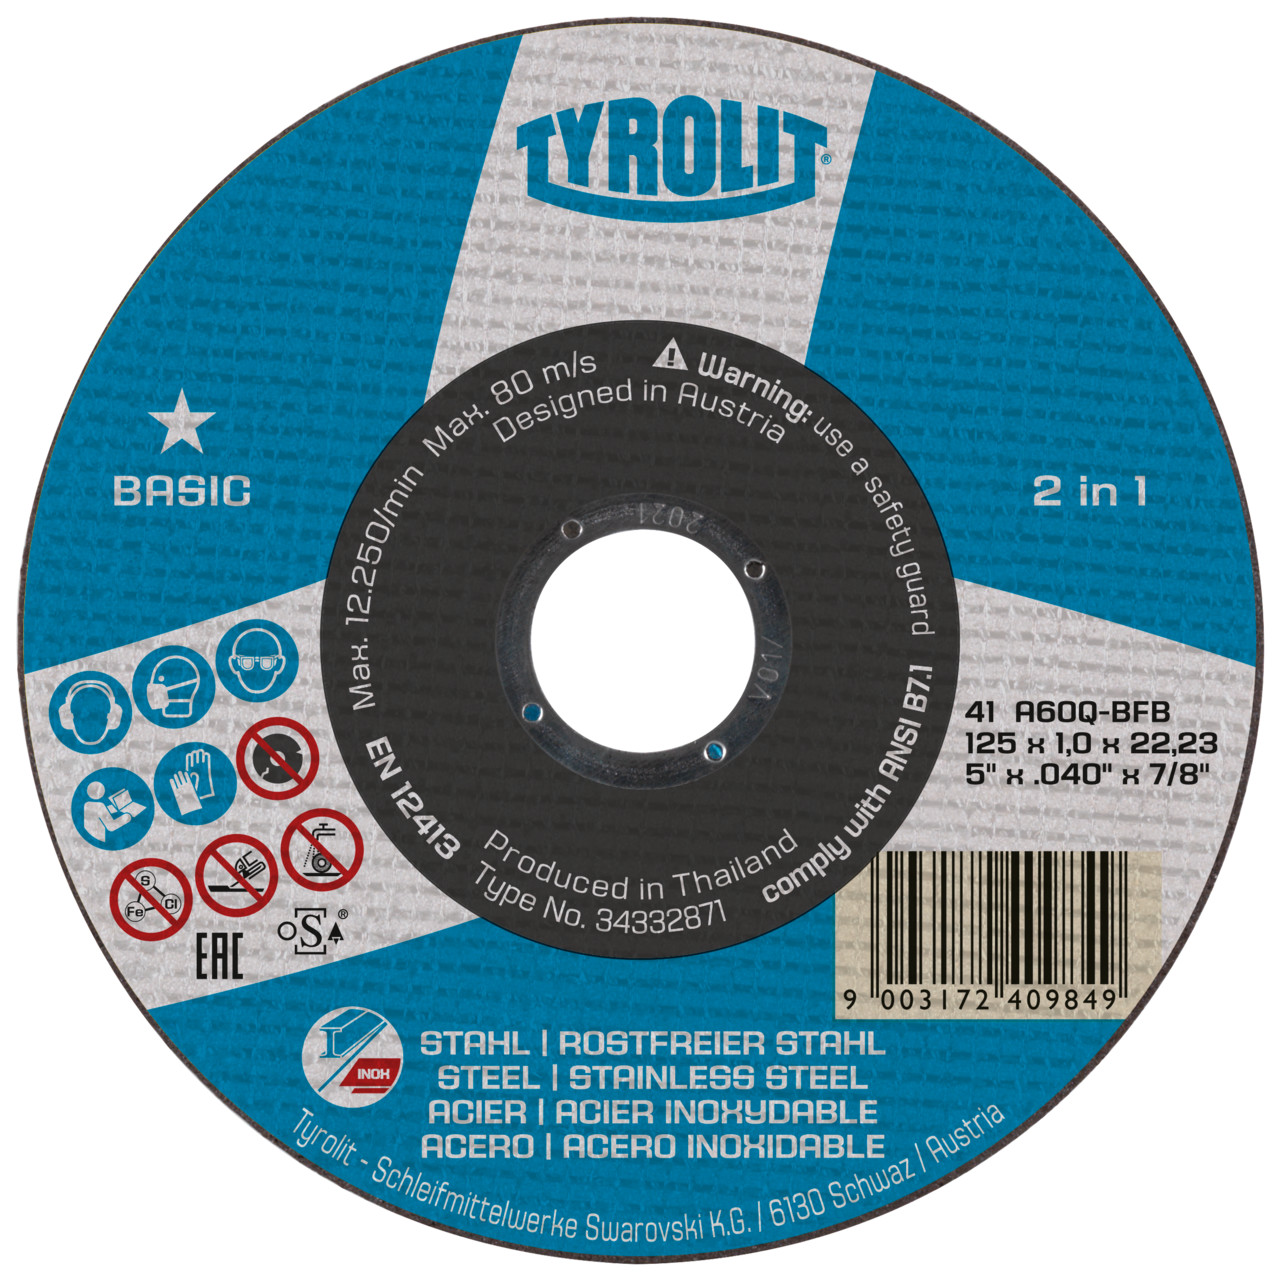 Tyrolit Cutting discs DxDxH 125x2.5x22.23 2in1 for steel and stainless steel, shape: 41 - straight version, Art. 222998